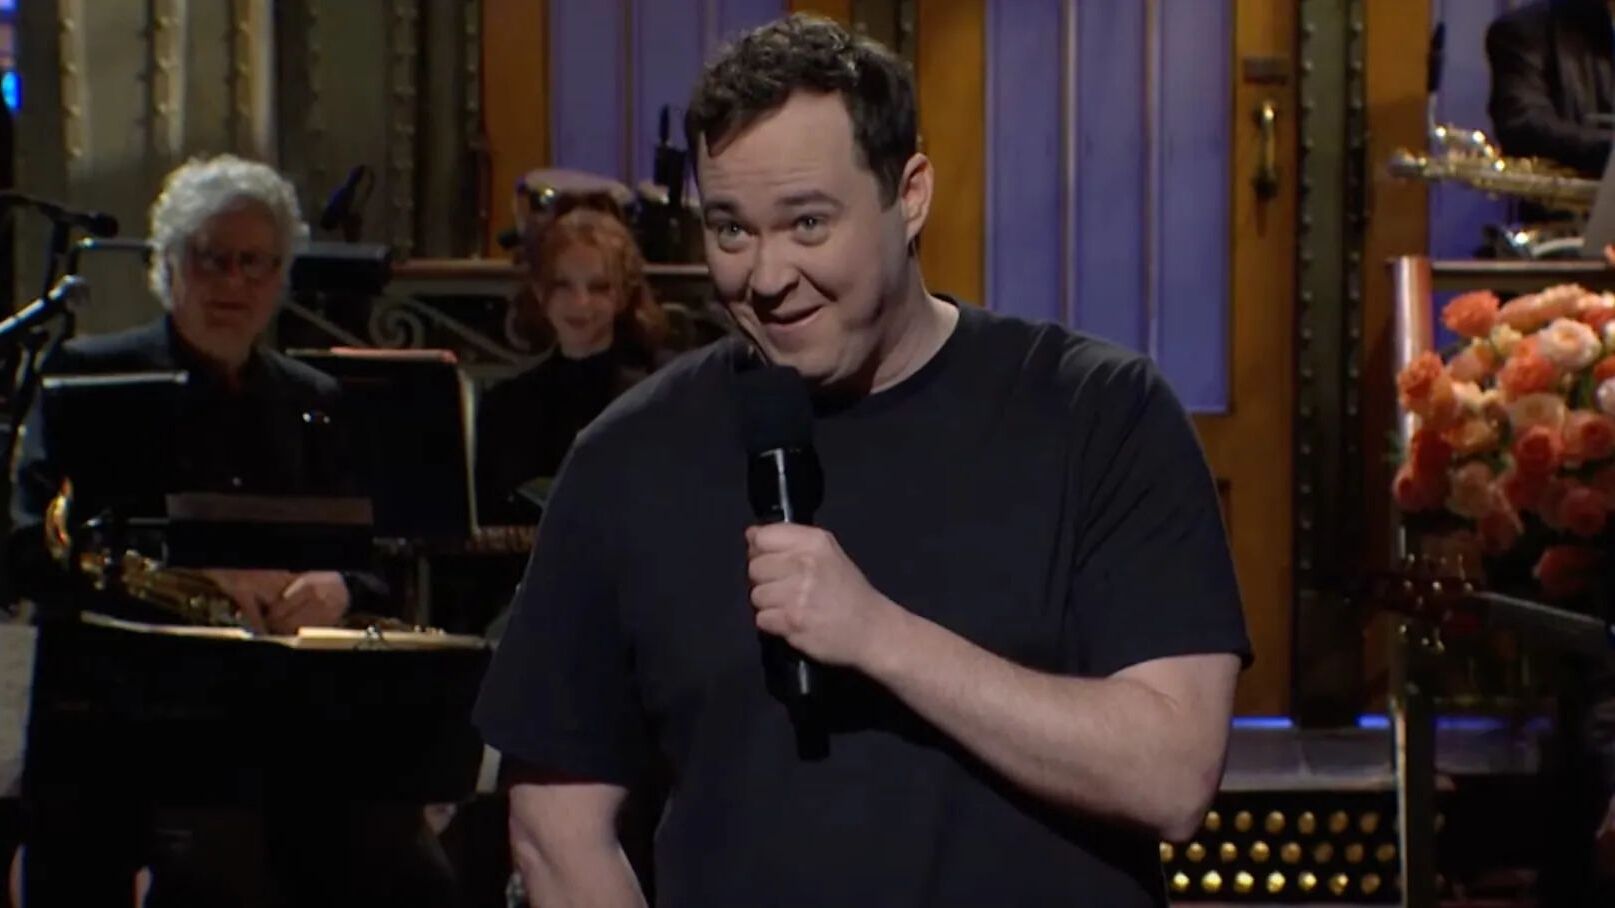 Shane Gillis Sparks Controversy With ‘SNL’ Monologue